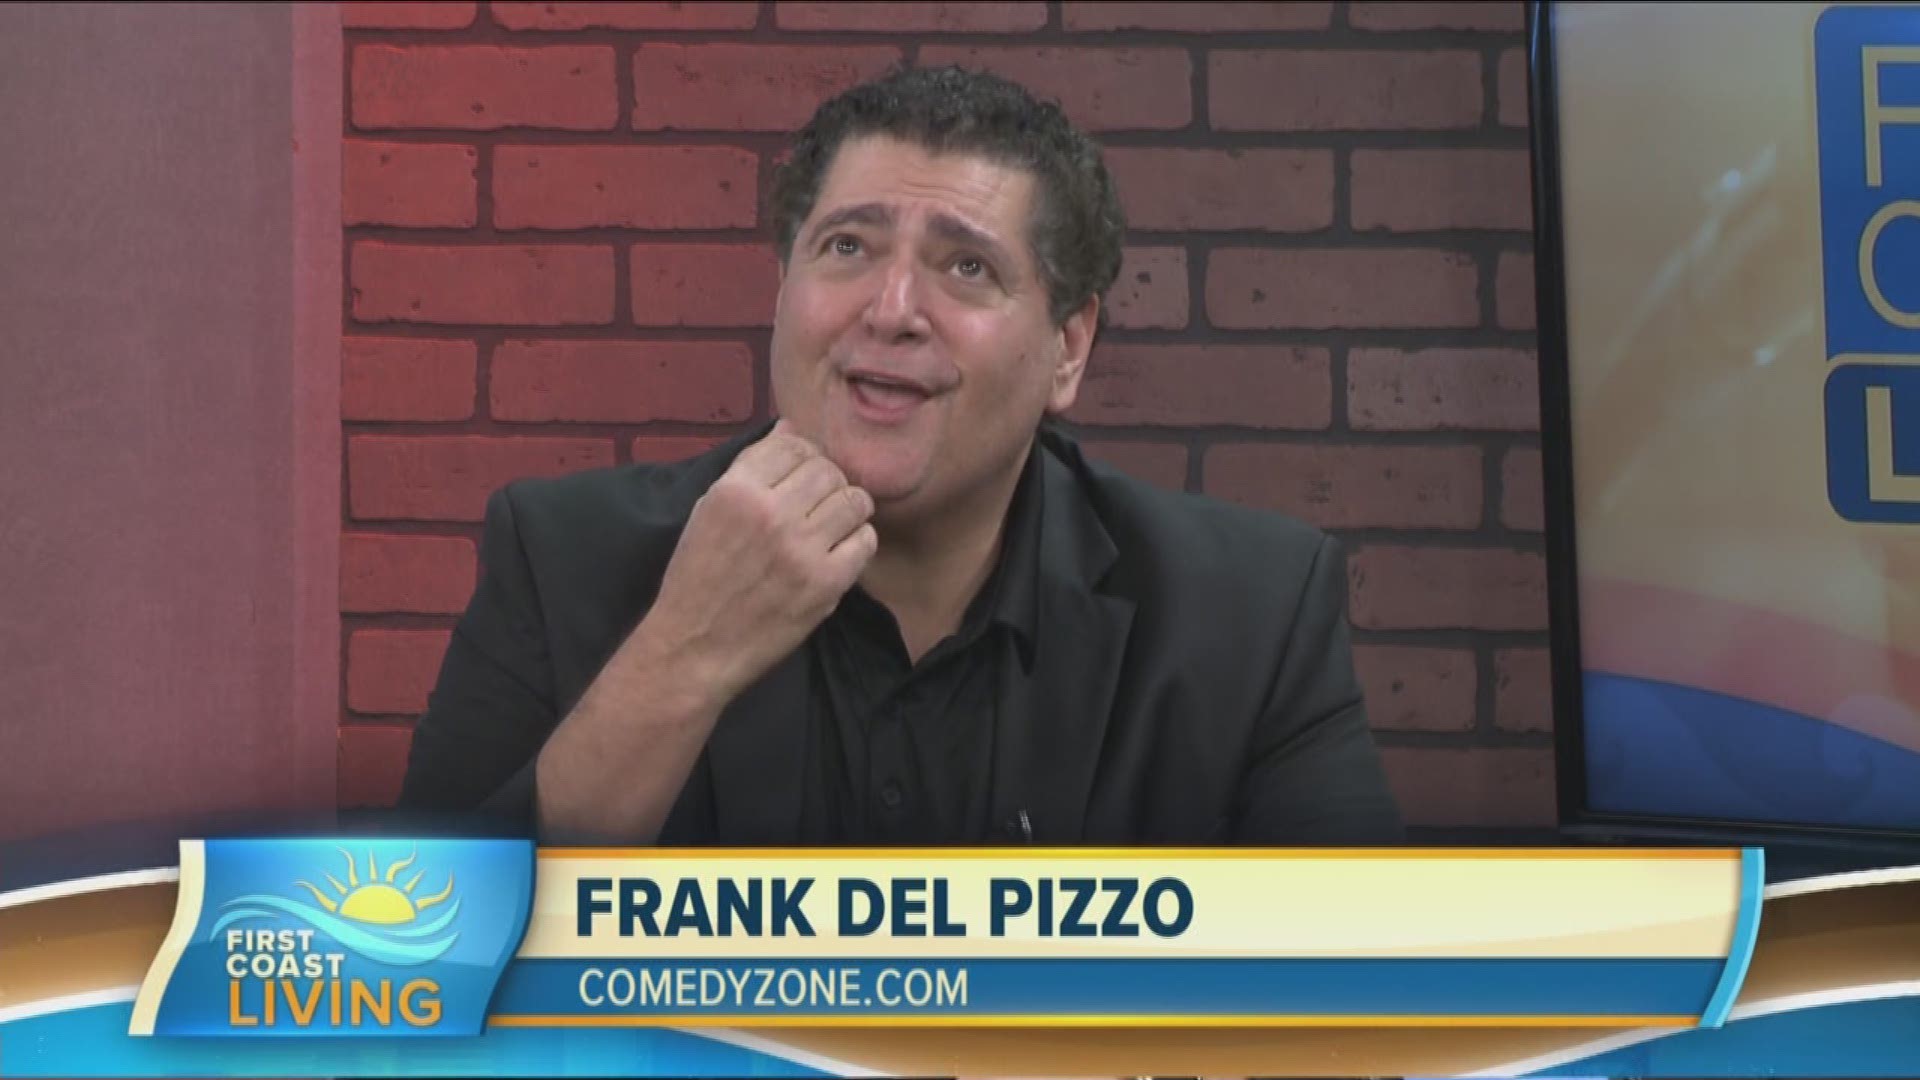 Get ready to laugh with comedian Frank Del Pizzo!